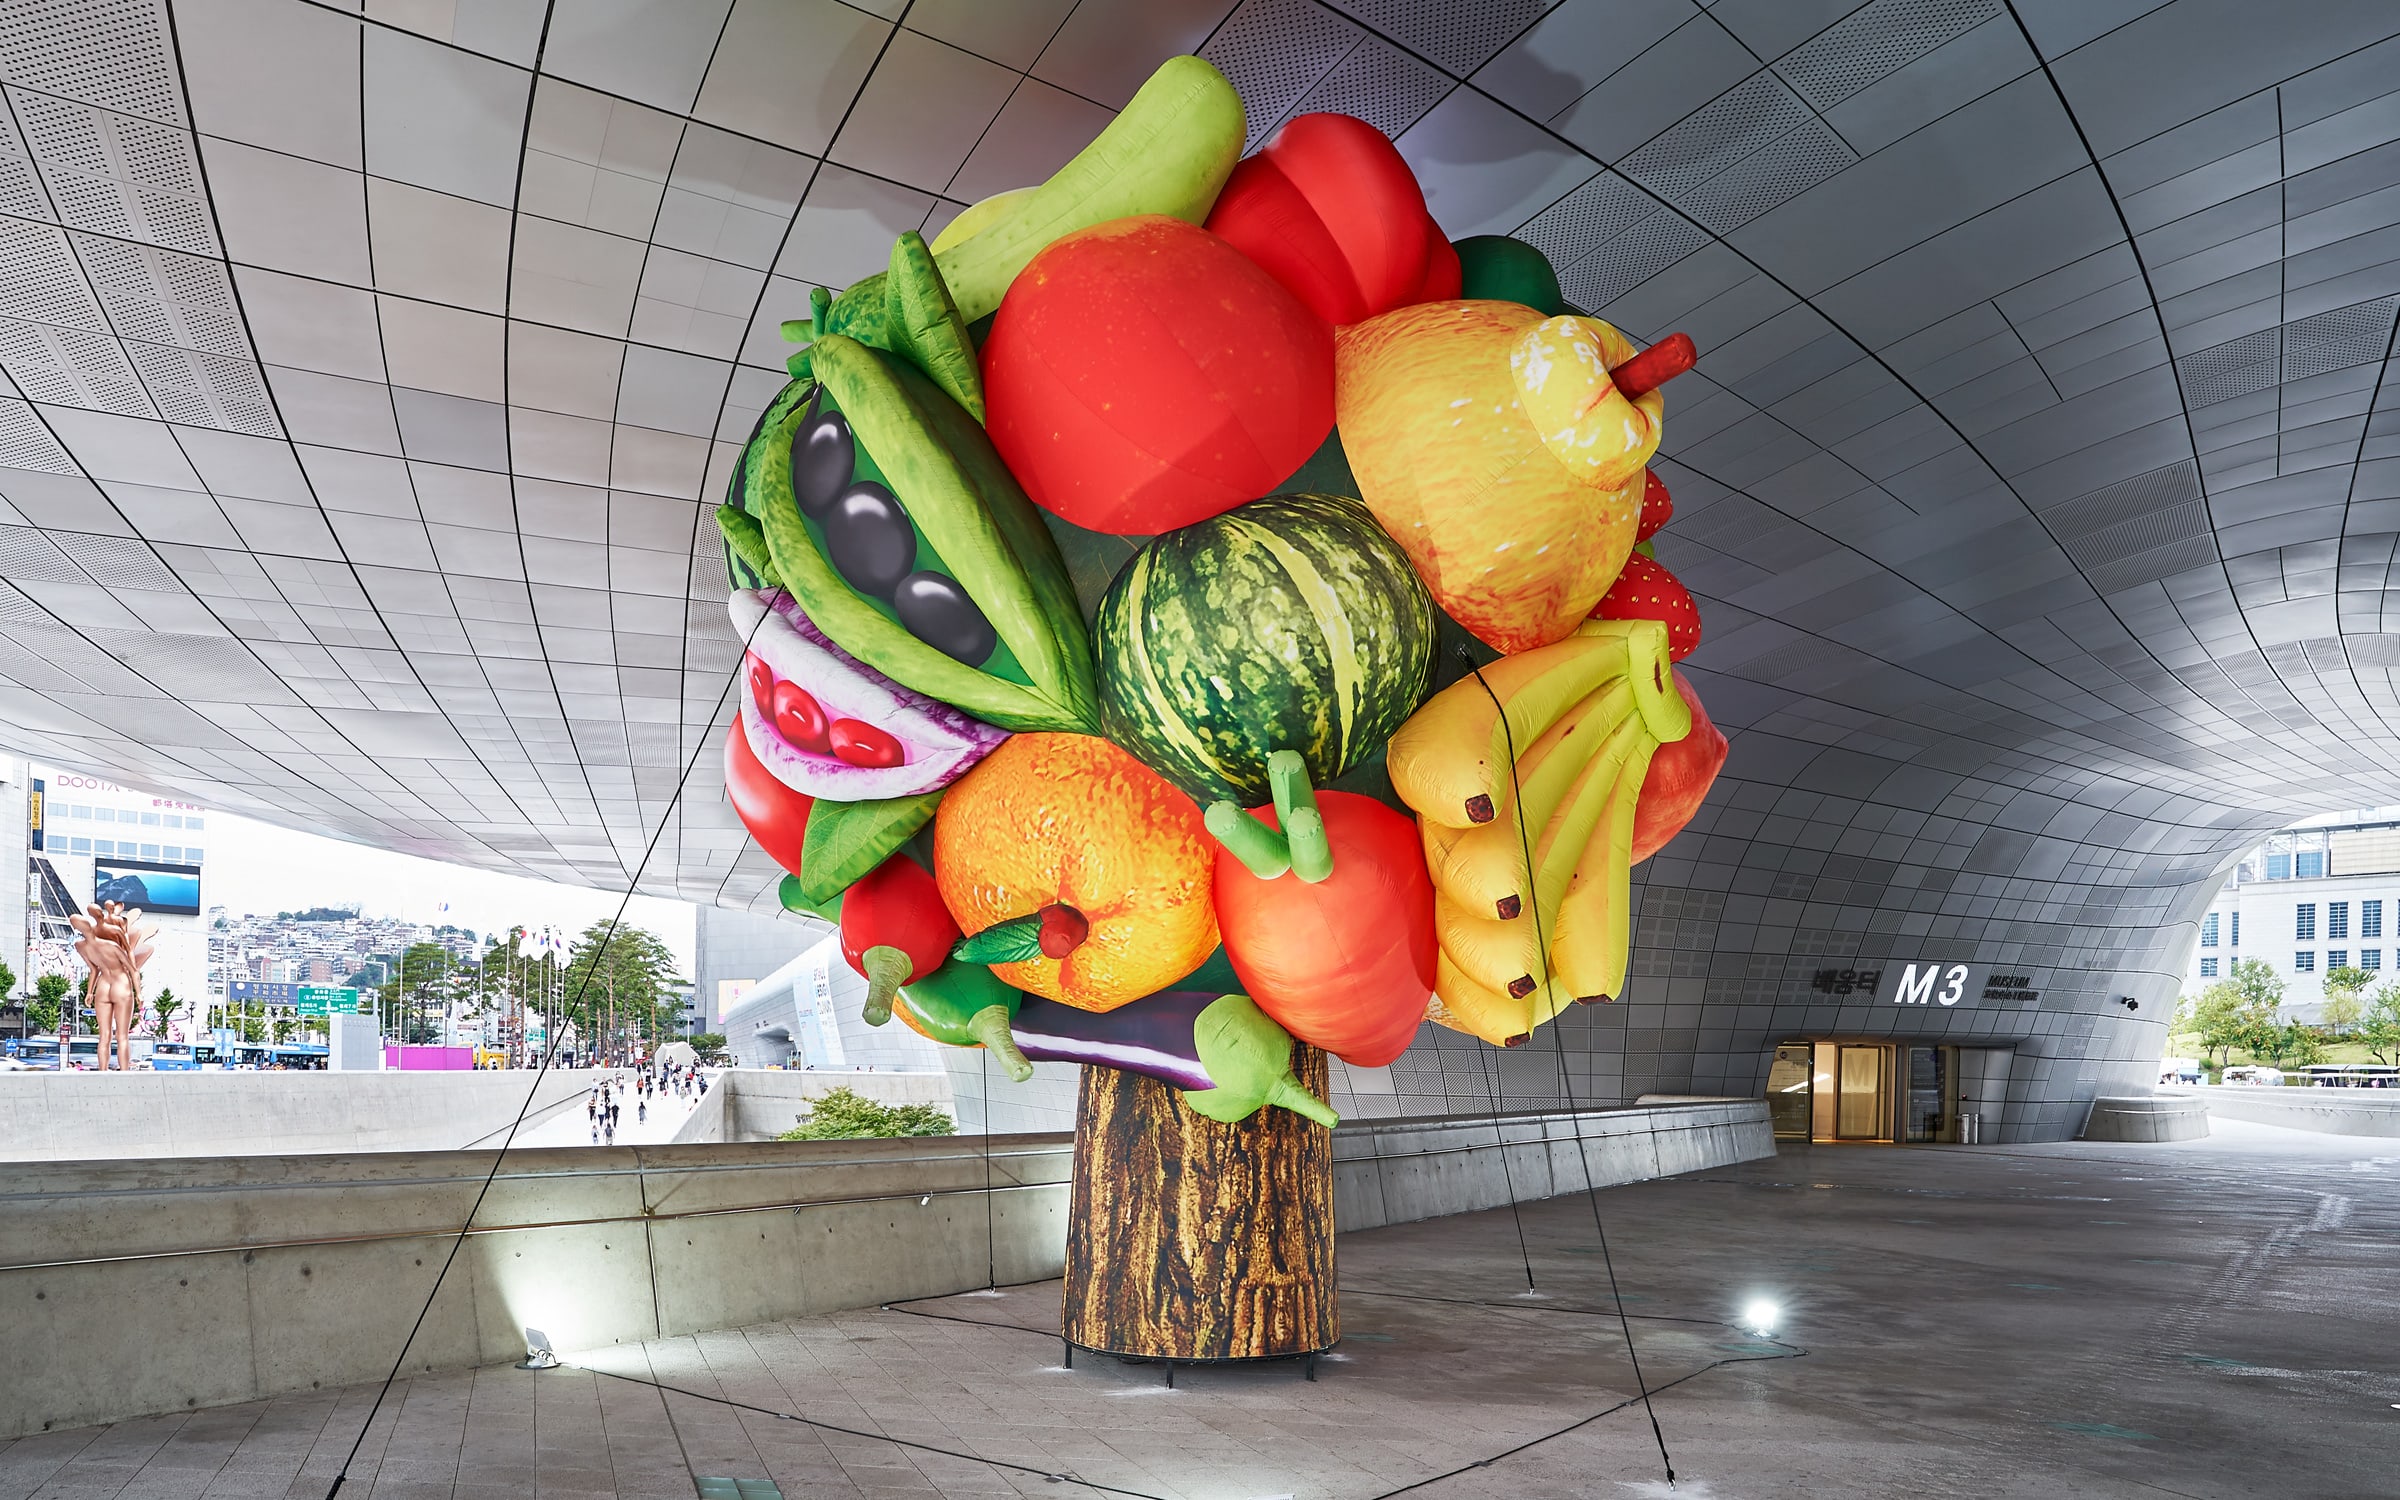 Choi Jeong Hwa, Fruit Tree, 2014-2018, exhibited in the frame of ‘Zurich Meets Seoul’ at DDP, Seoul, September 2019. Courtesy of the artist and P21, Seoul.